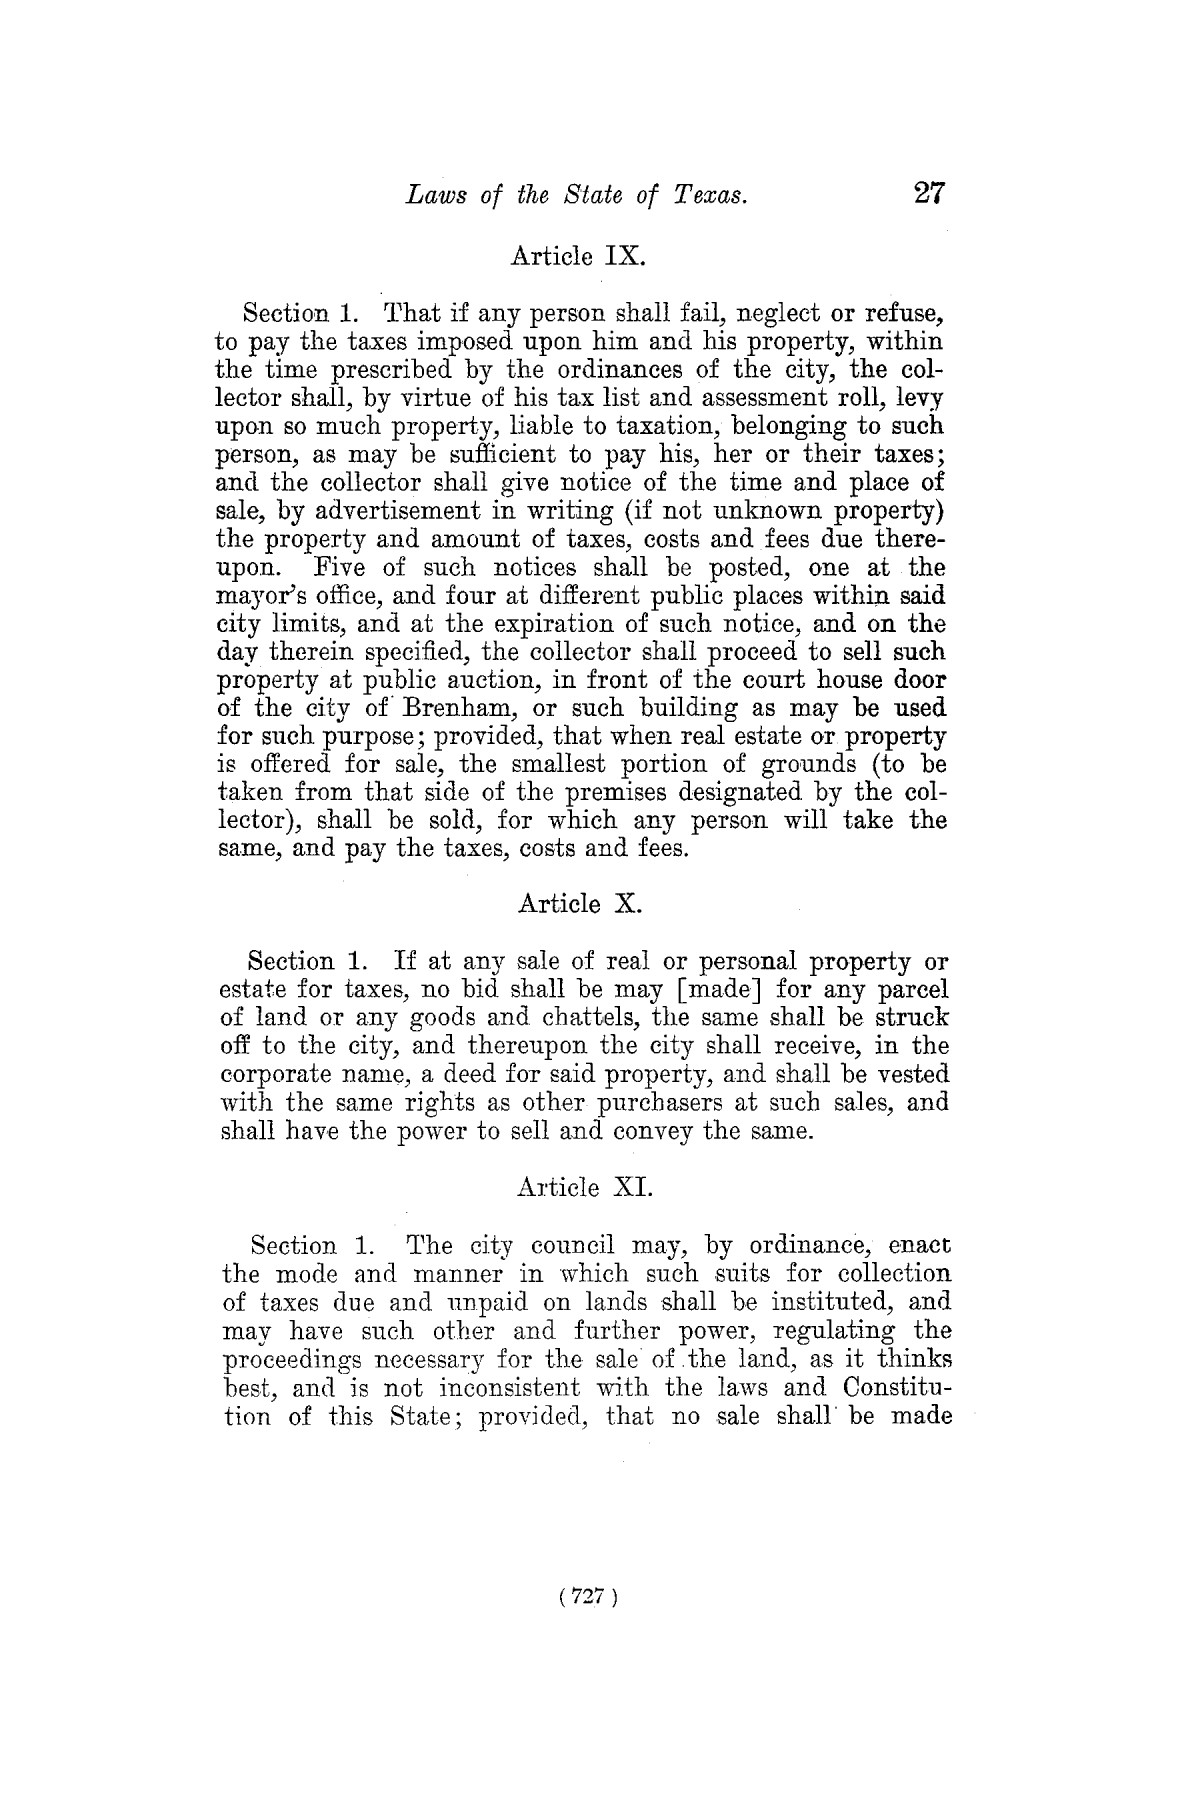 The Laws of Texas, 1822-1897 Volume 7
                                                
                                                    727
                                                